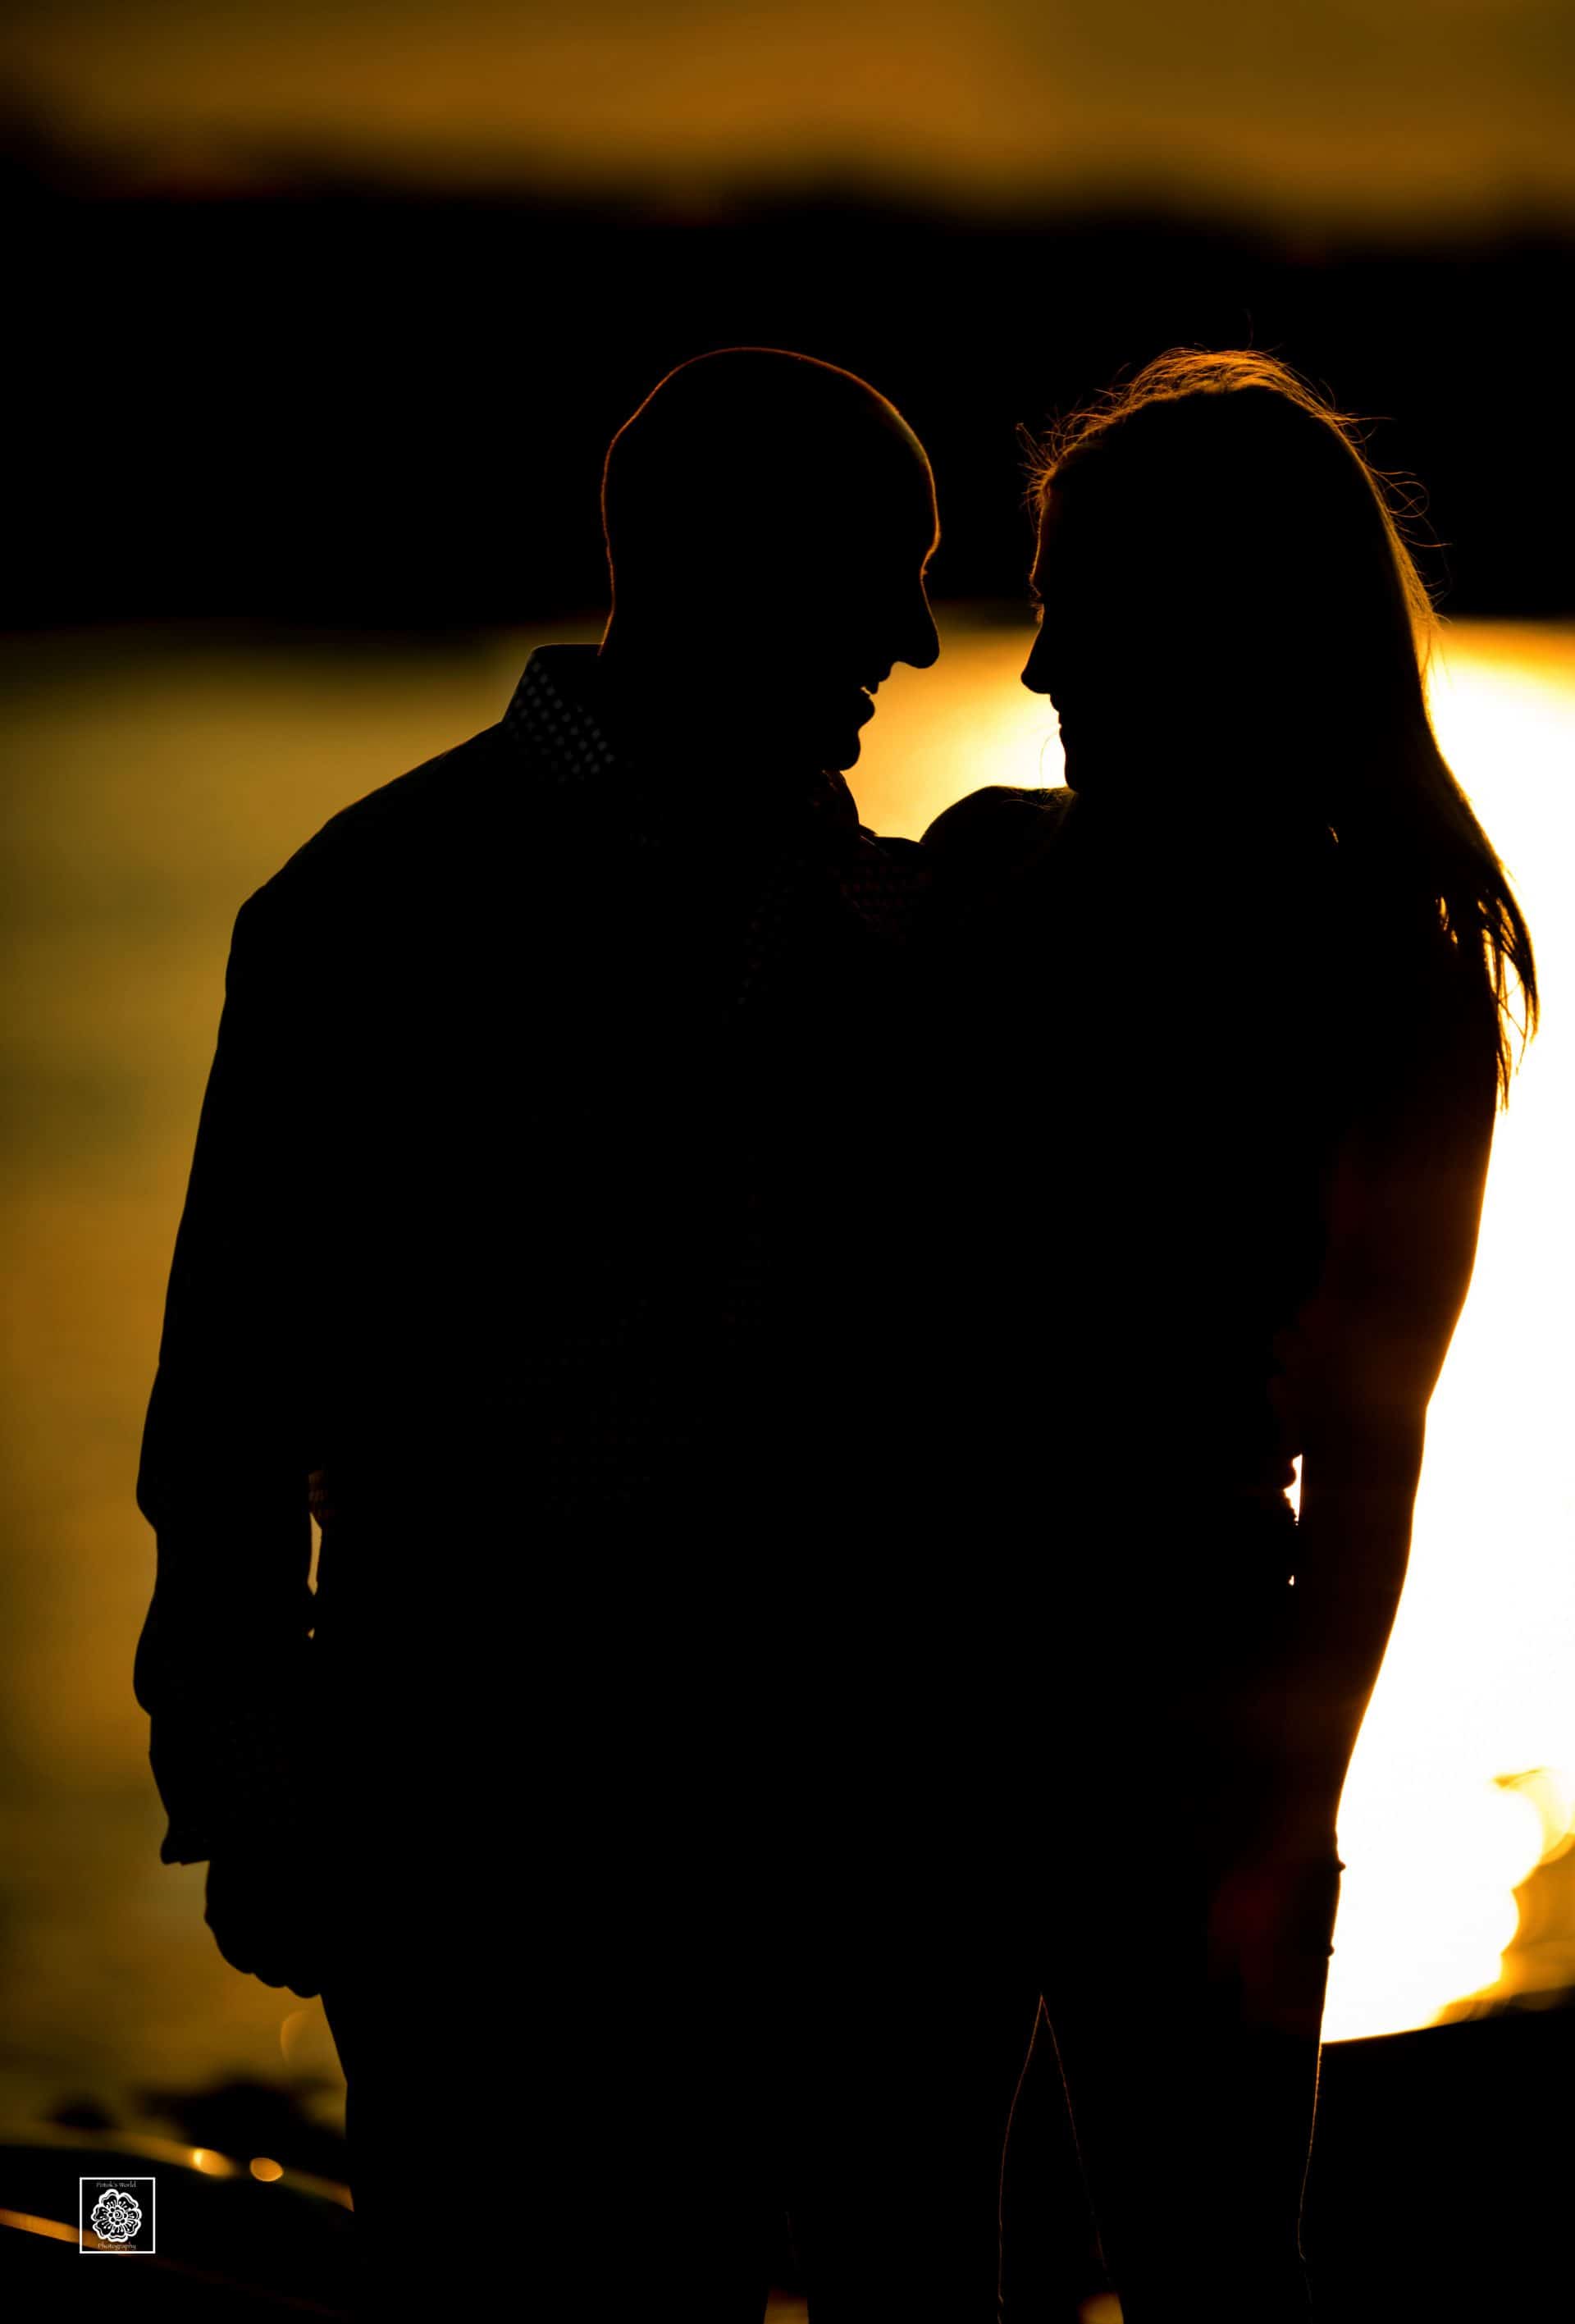 Sunset engagement photo silhouette at the Georgetown waterfront by DC wedding photographers of Potok's World Photography